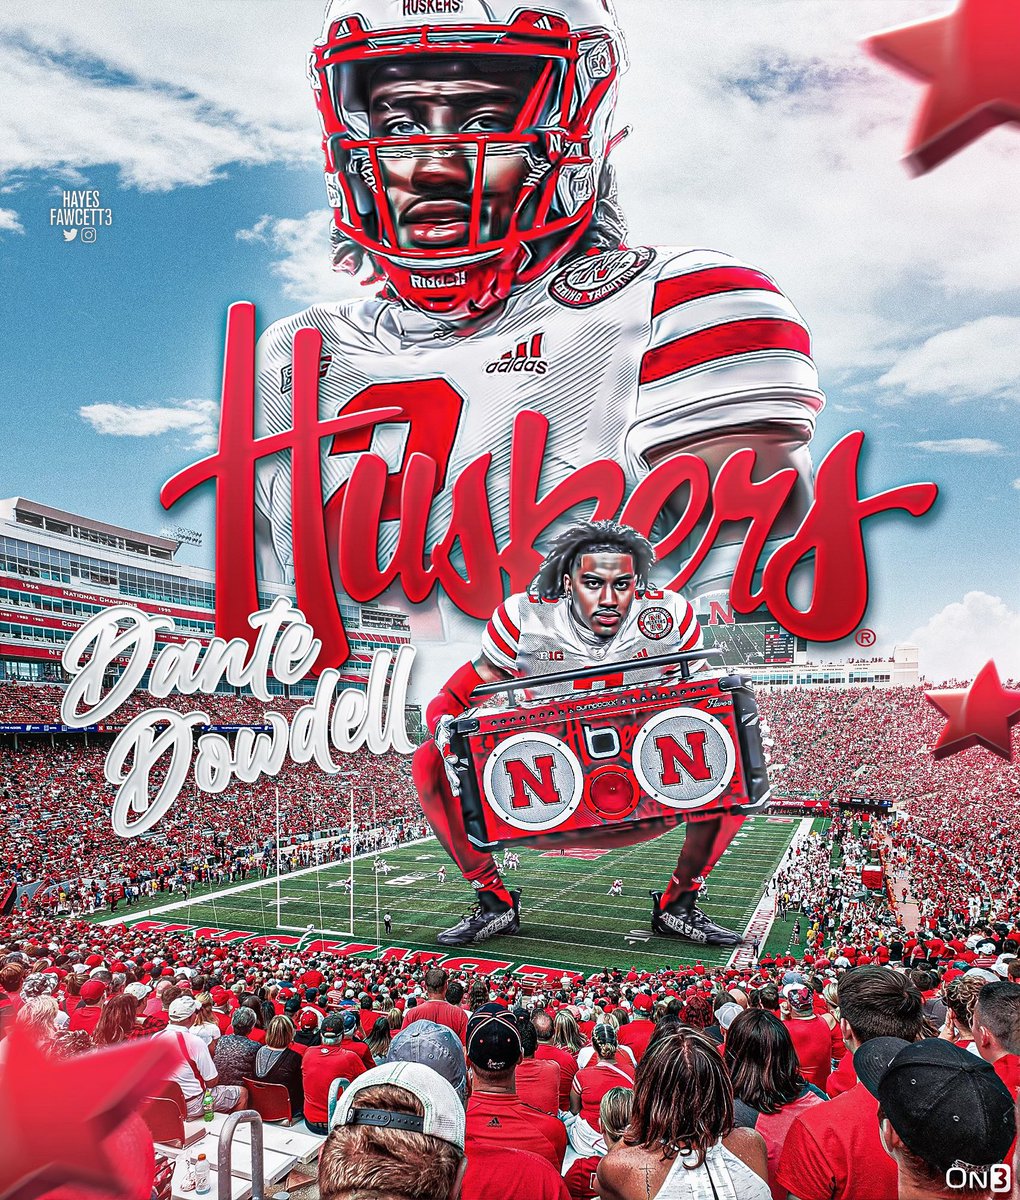 BREAKING: Former Oregon RB Dante Dowdell has Committed to Nebraska, he tells @on3sports The 6’2 215 RB was ranked as a Top 10 RB in the ‘23 Class Will have 3 years of eligibility remaining “I want to help restore the roar of this stadium.” on3.com/news/dante-dow…